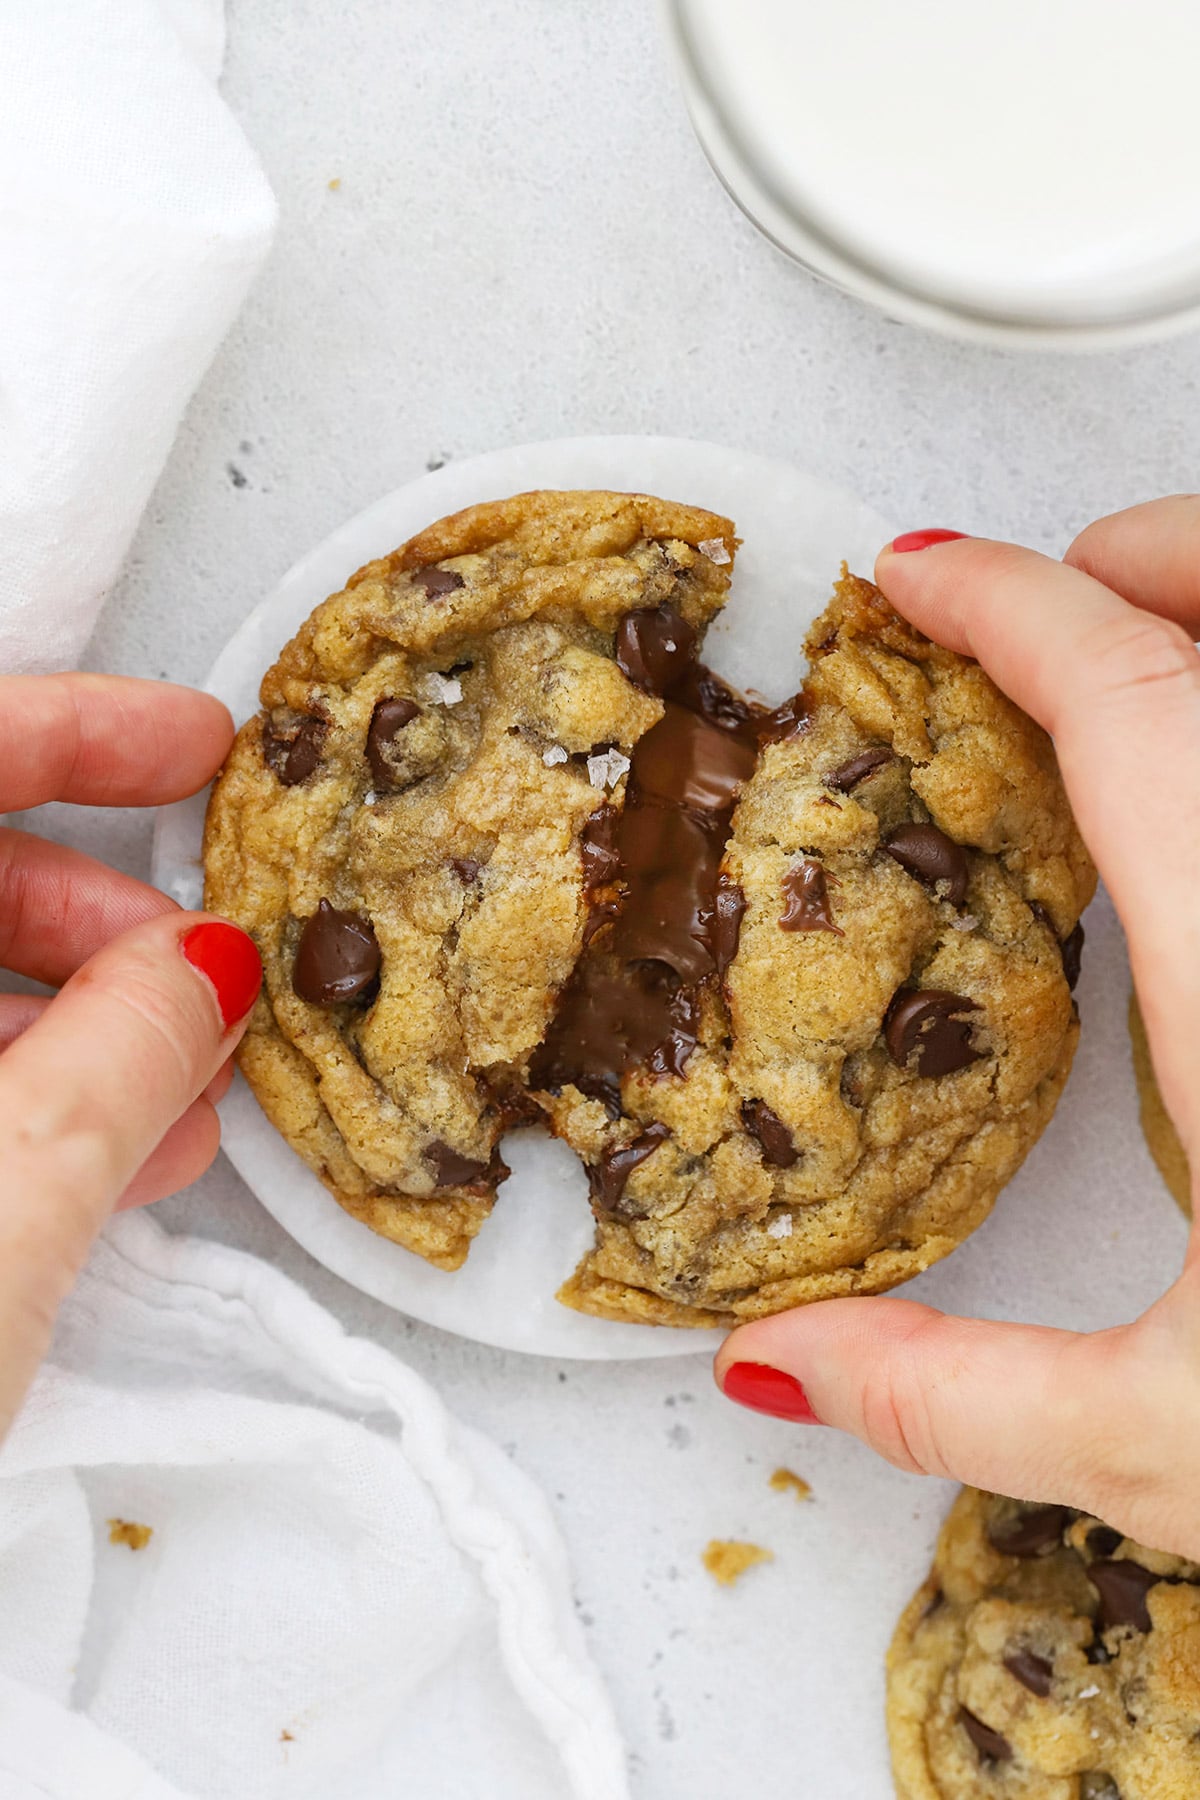 Pulling apart a gluten-free Nutella chocolate chip cookie, revealing the gooey nutella center